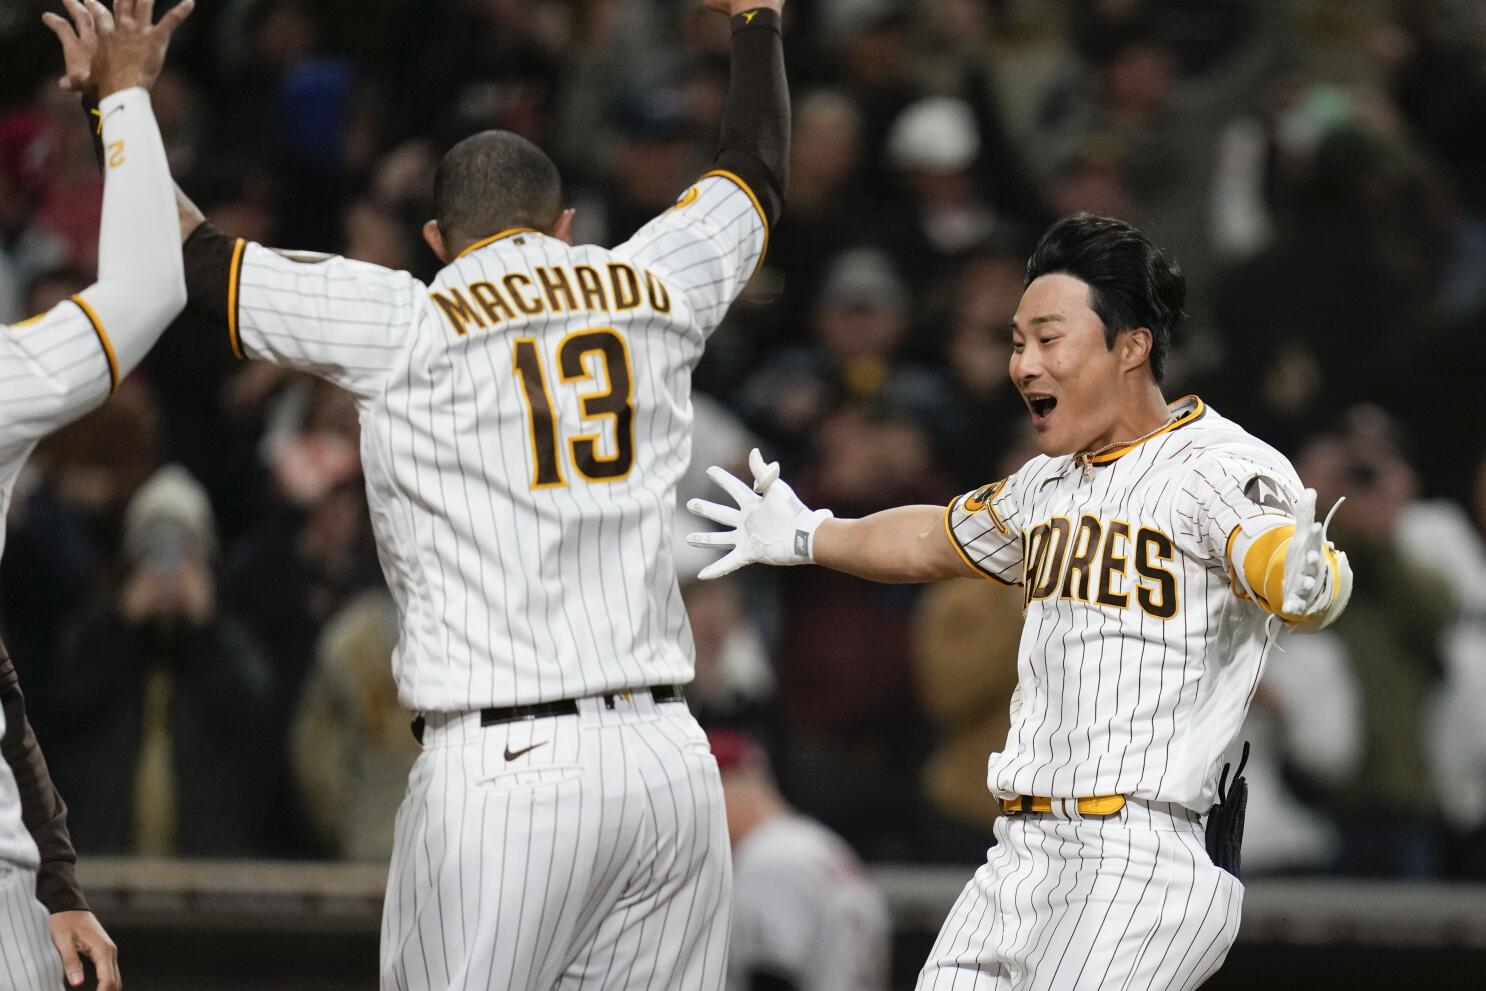 The Padres' Ha-Seong Kim is inspiring the next wave of Korean ballplayers -  The Athletic